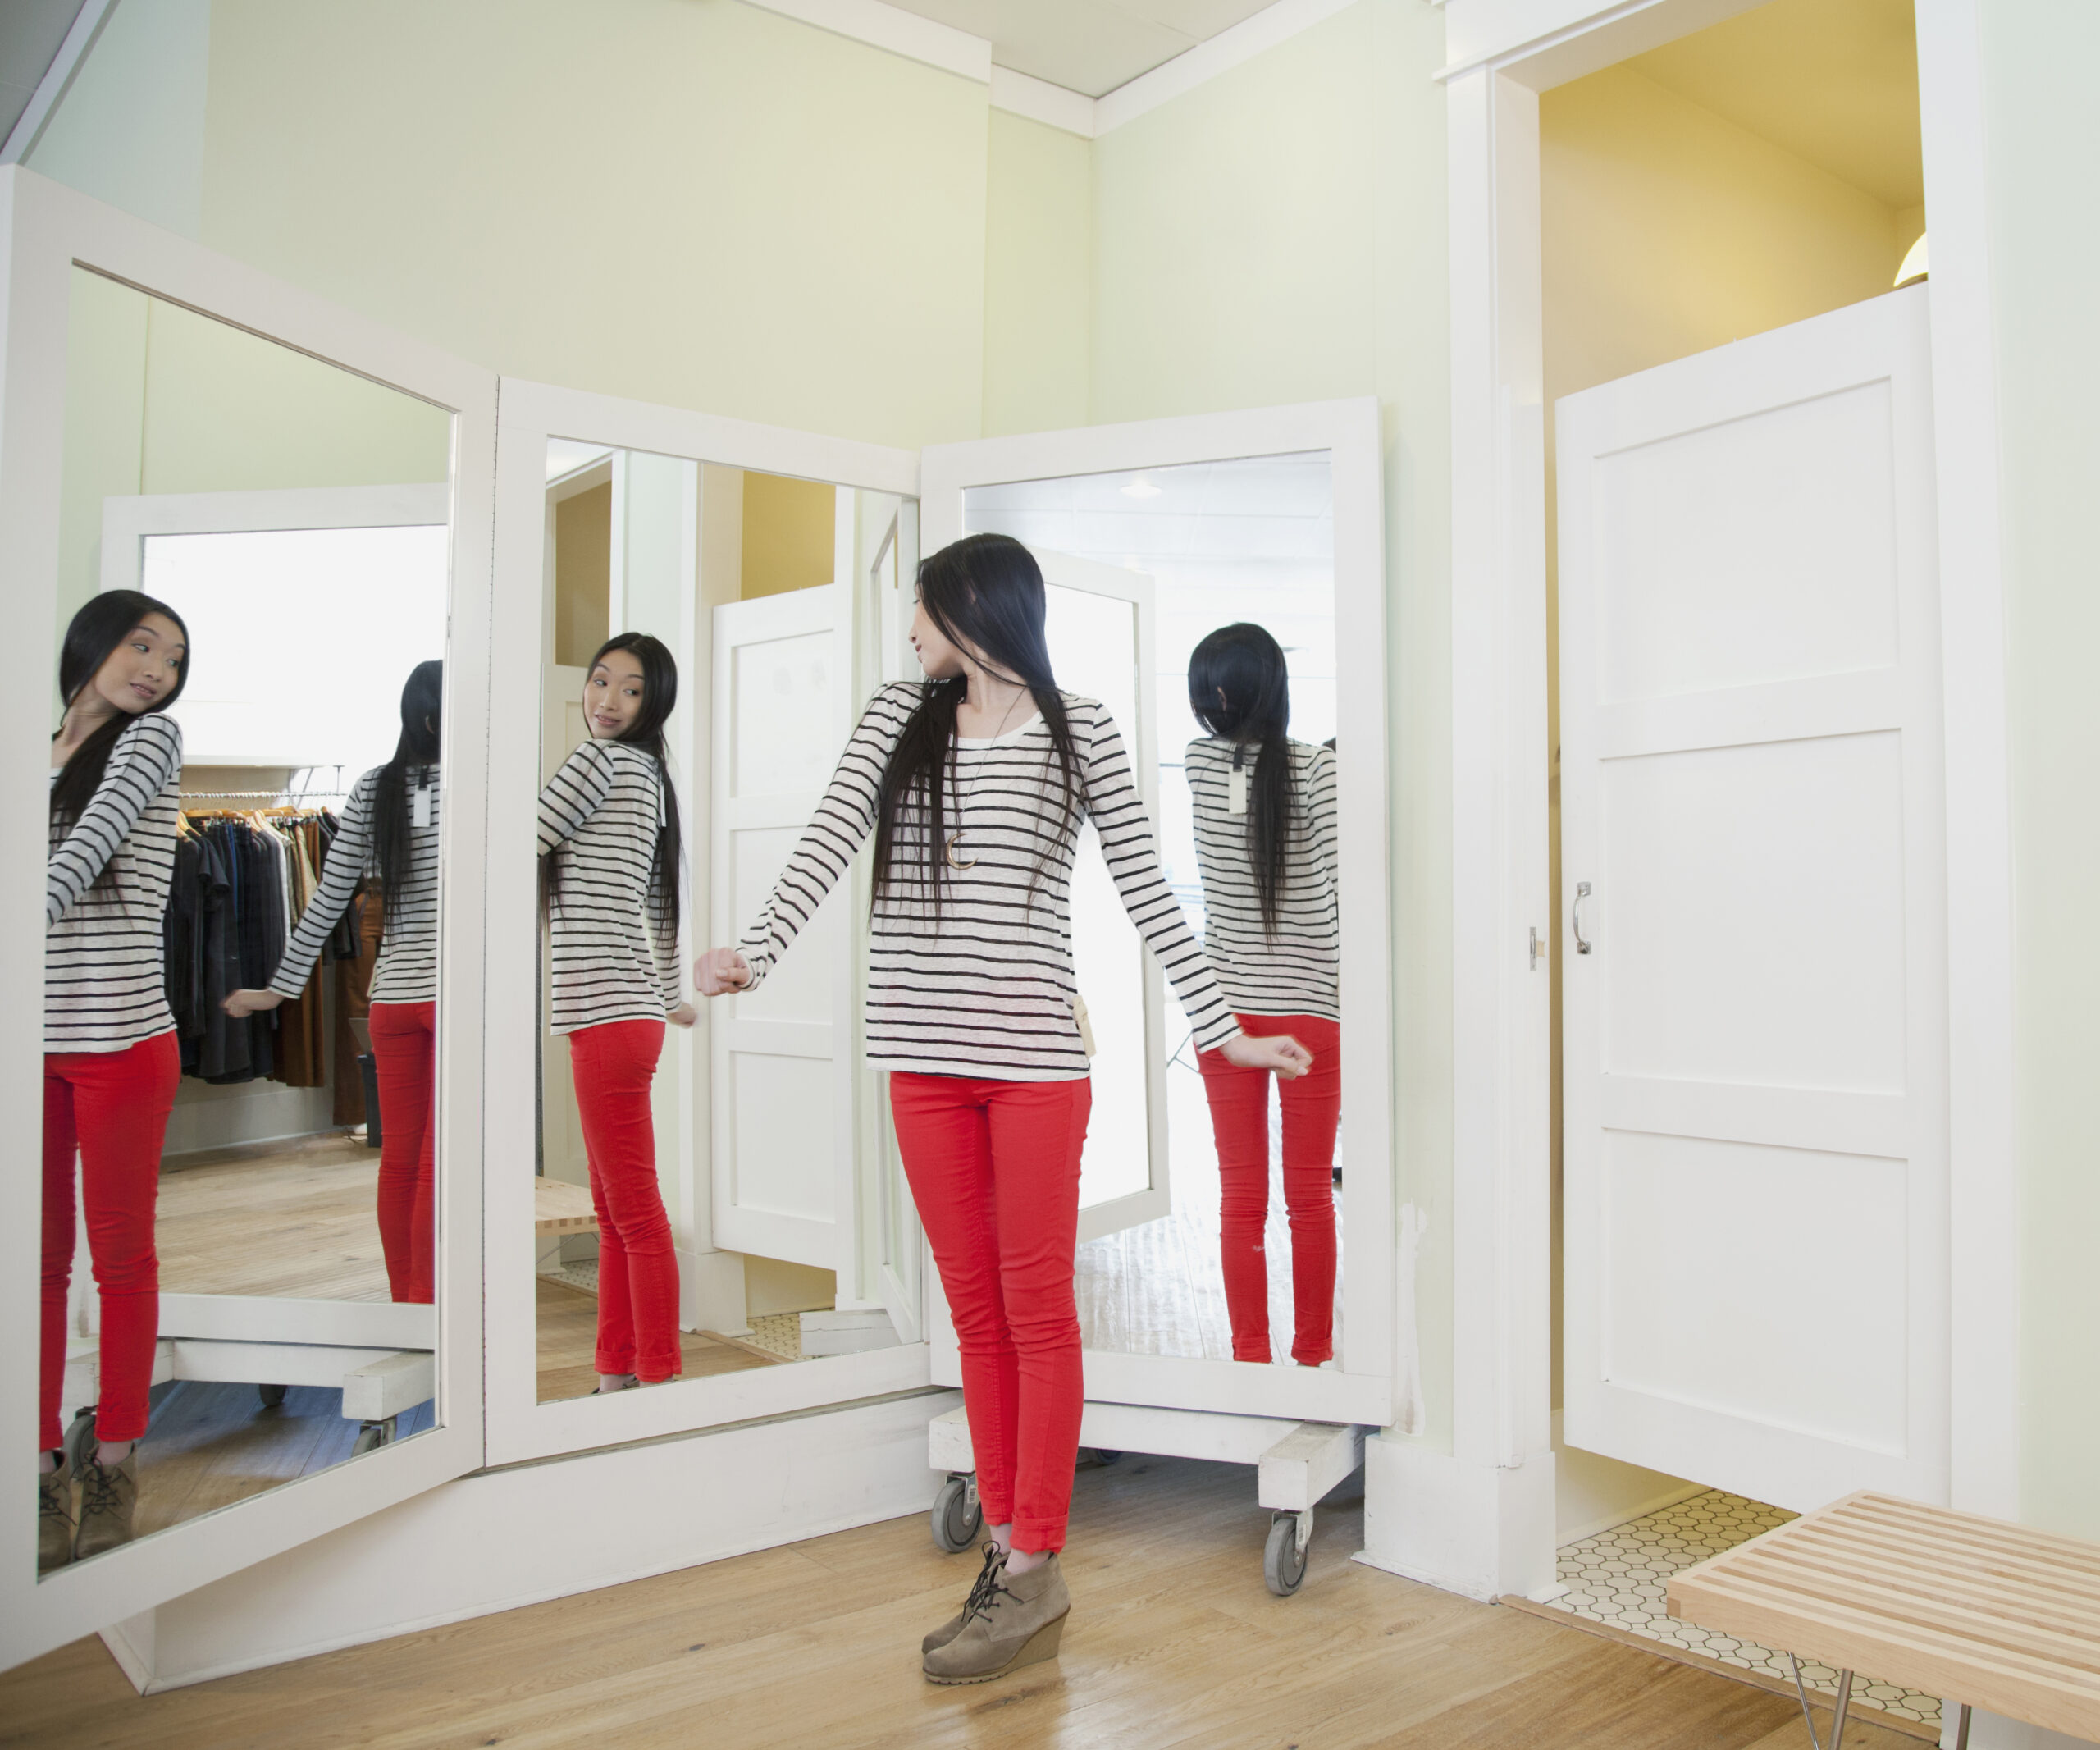 Are mirrors in changing rooms to blame for poor body image?